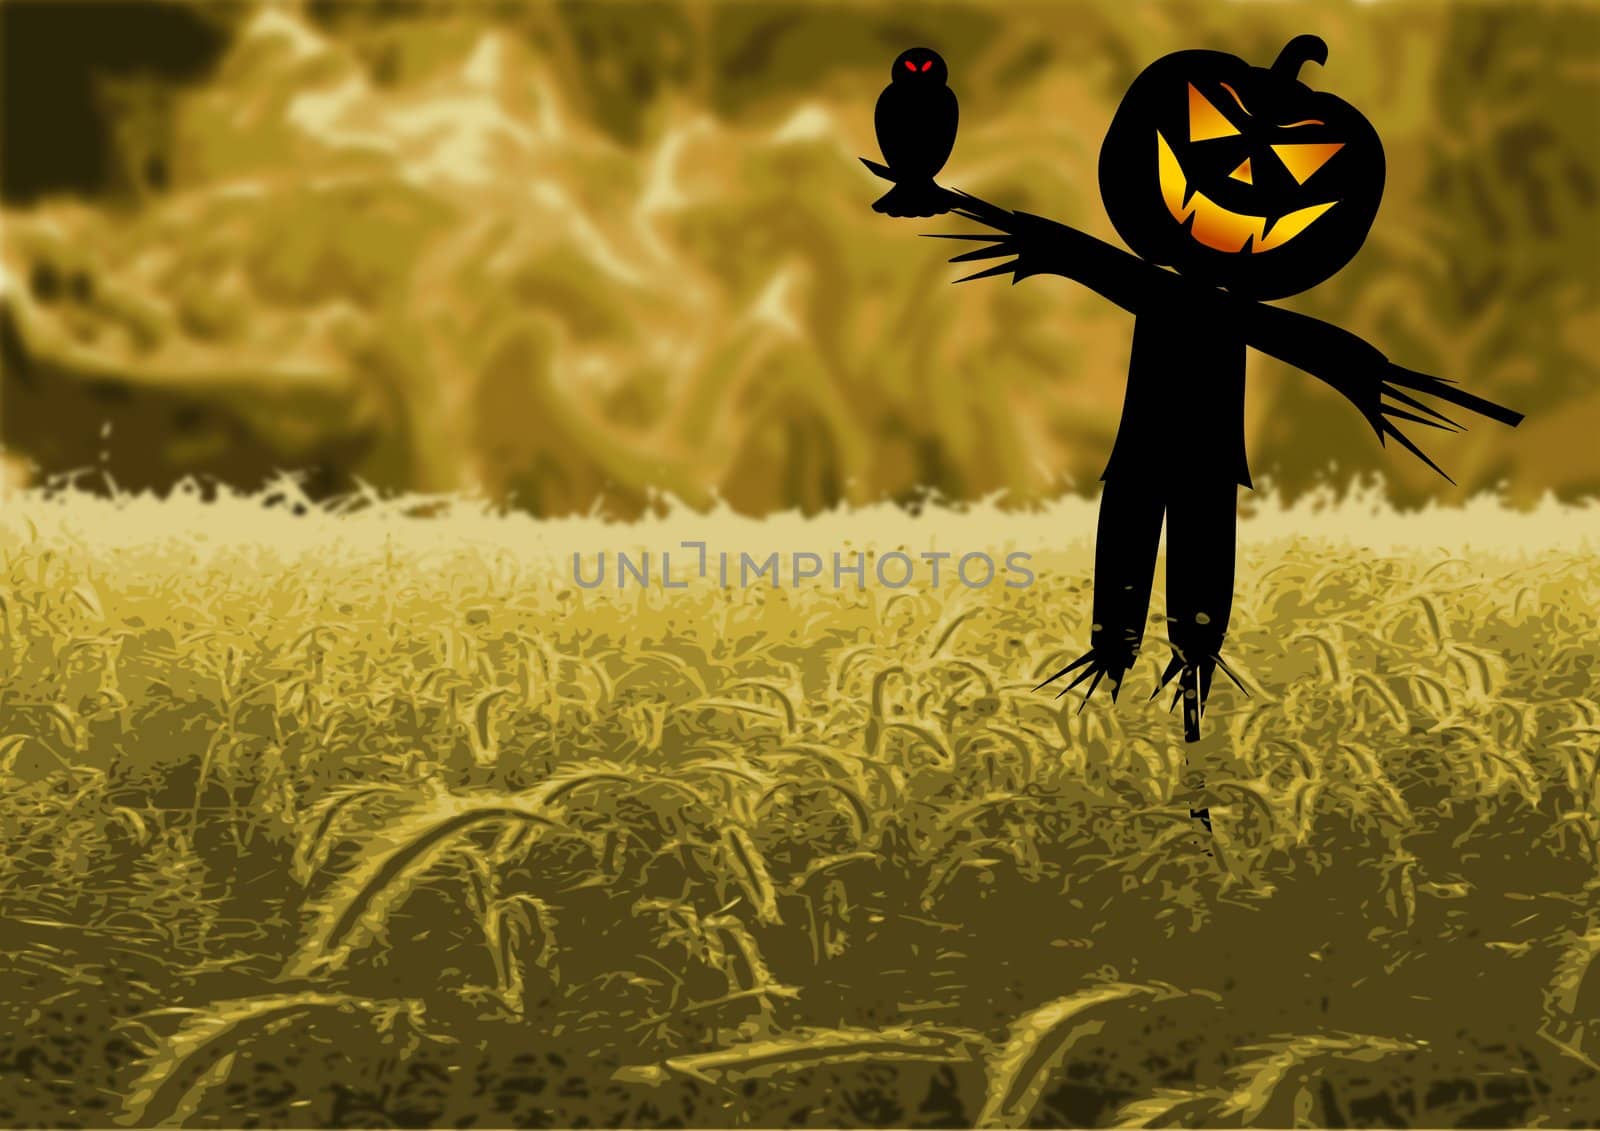 Illustration of a scare crow in a field with violent clouds in the background.